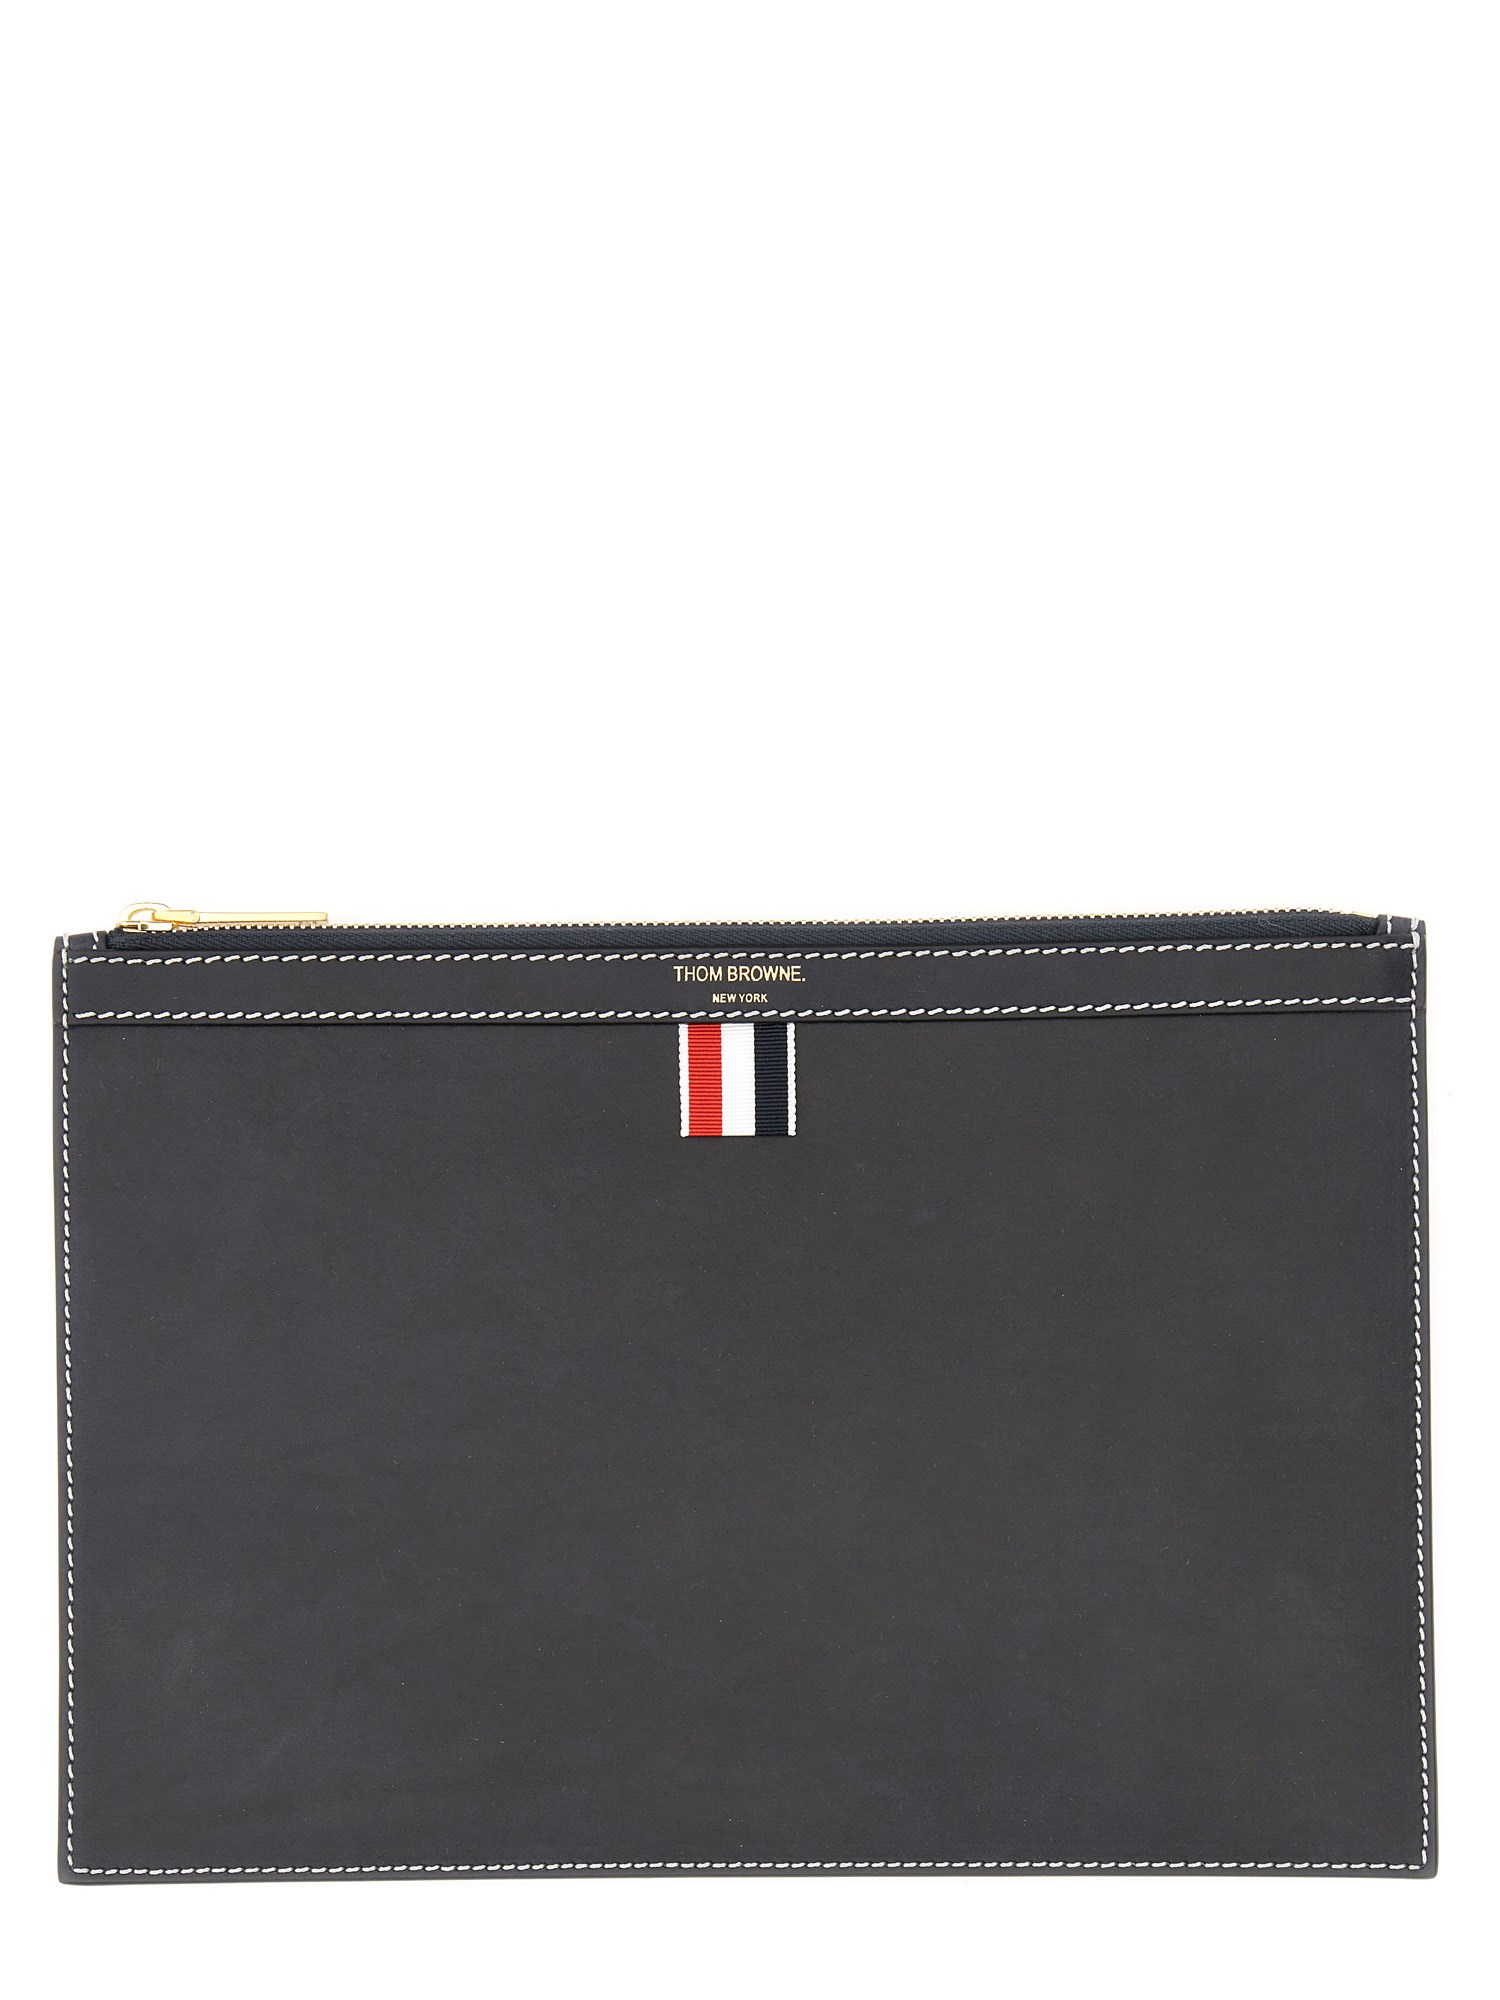 thom browne small tablet holder